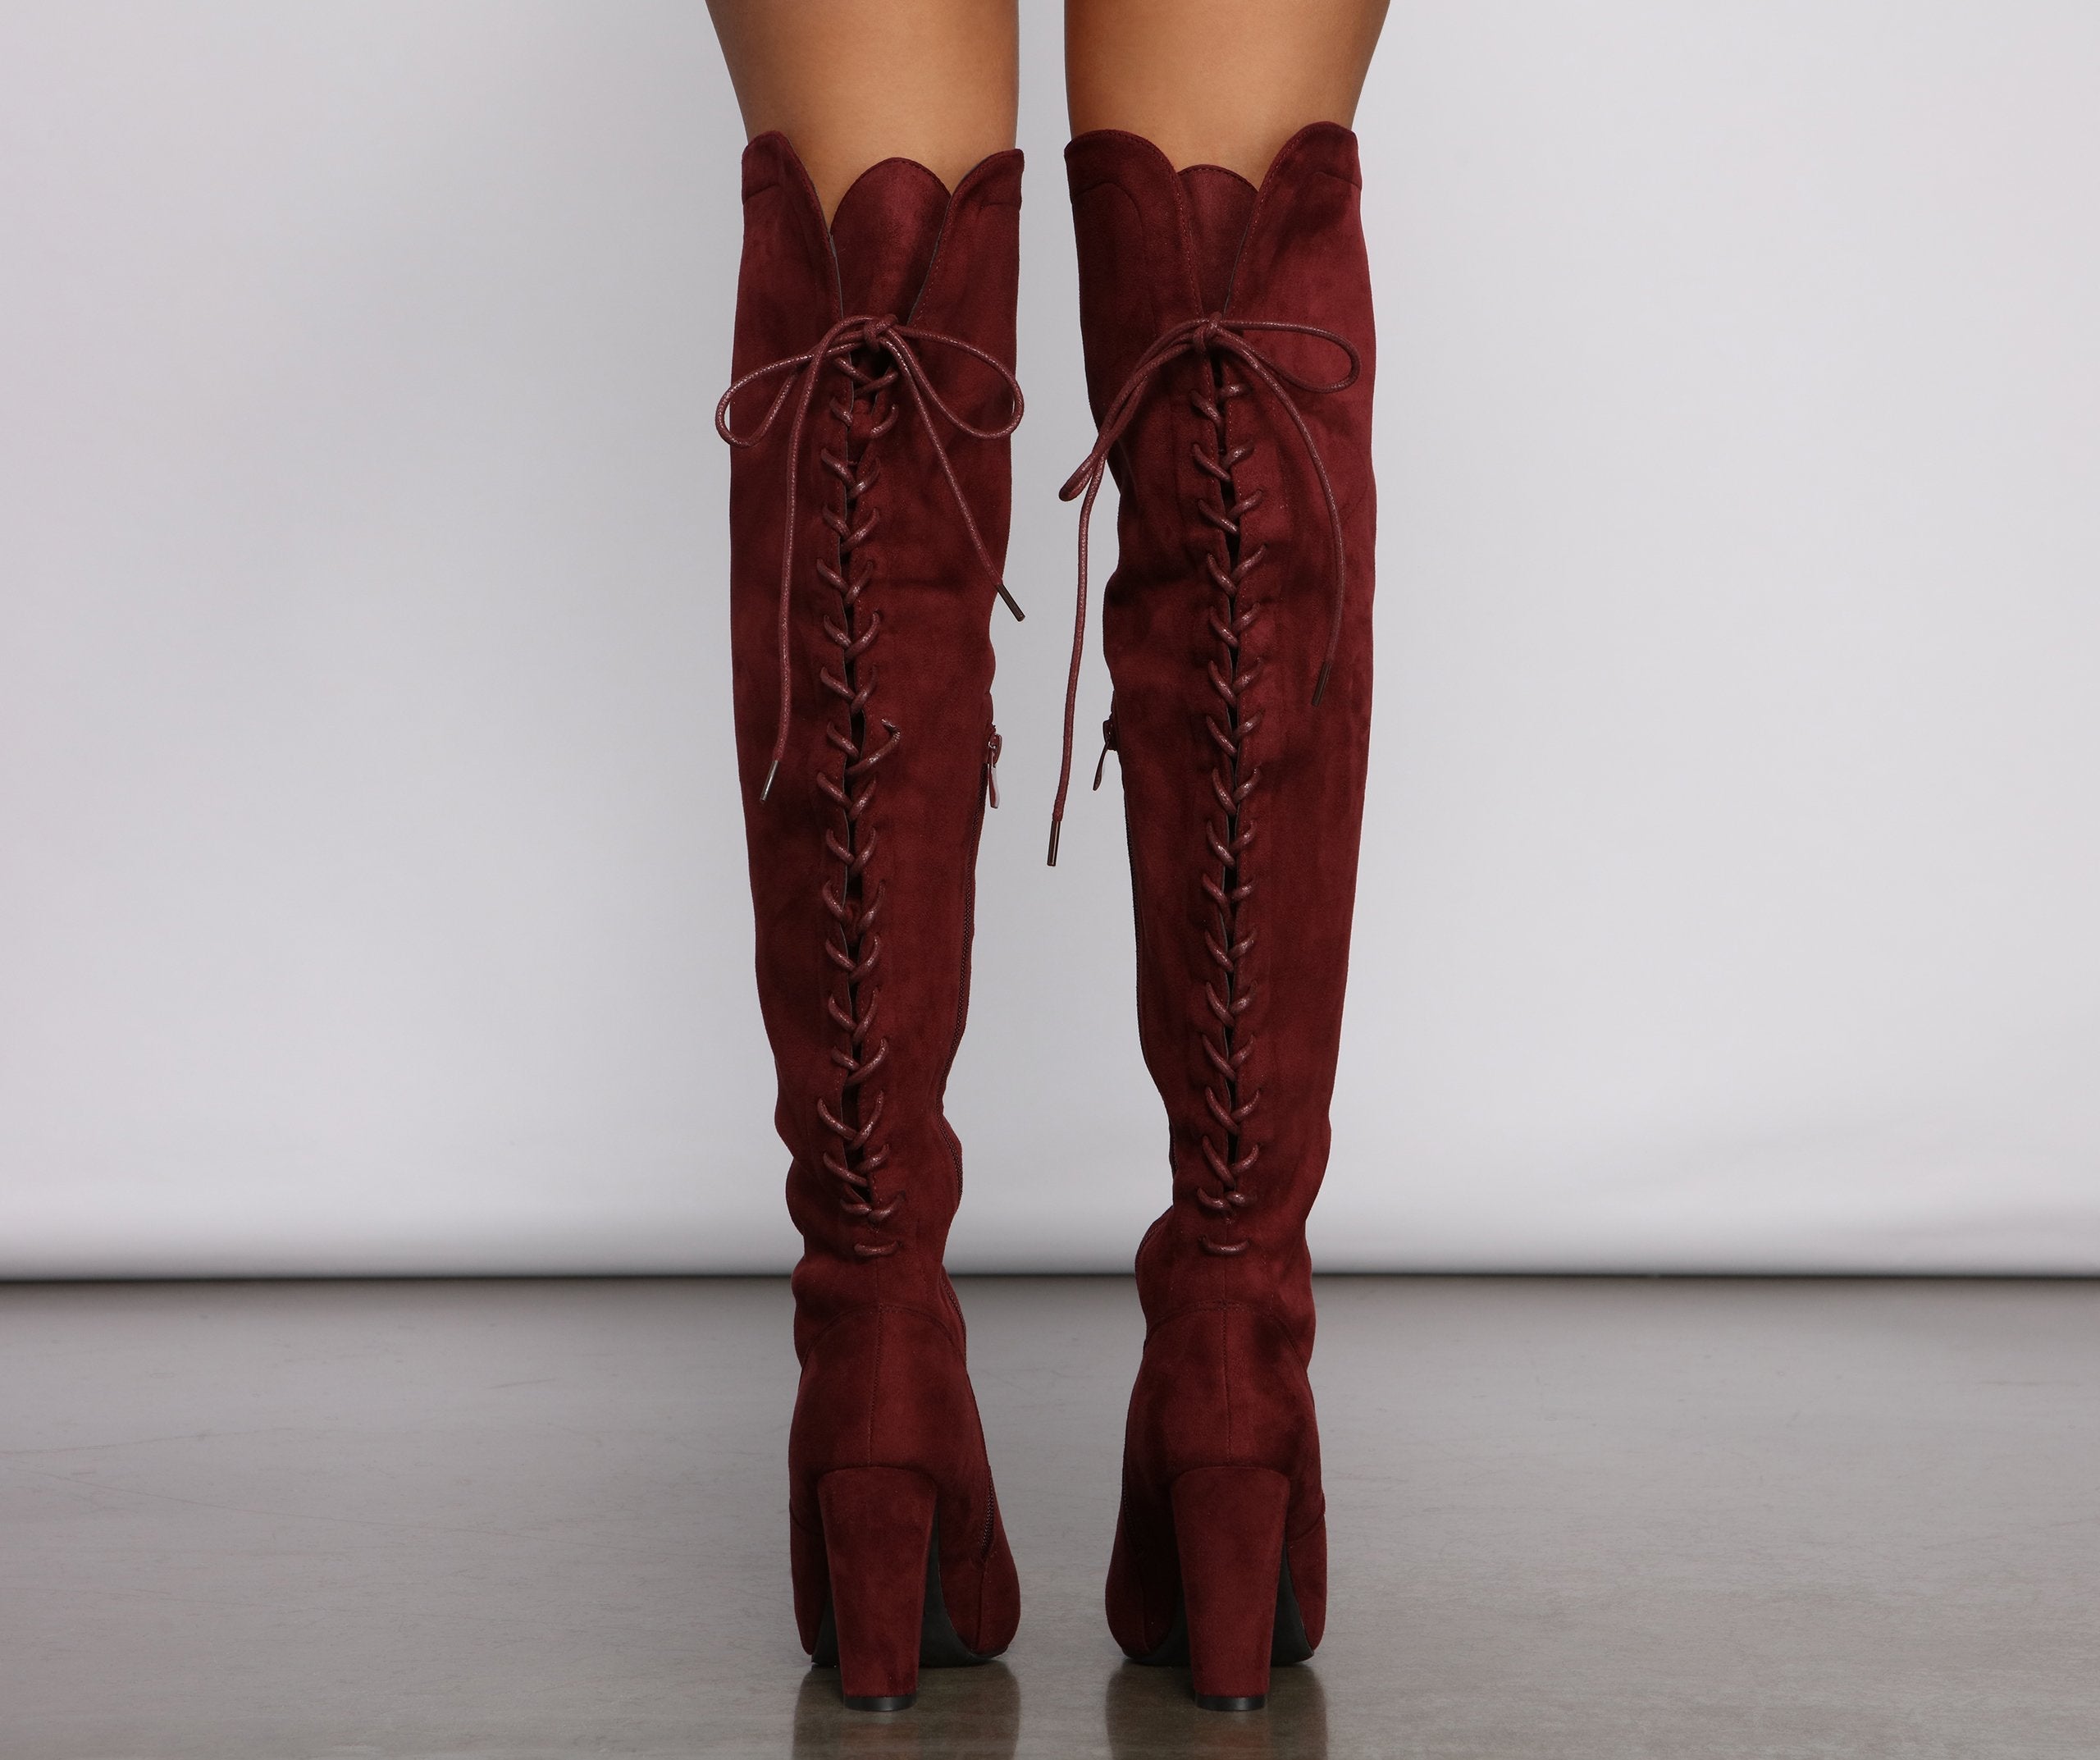 Lace Back Over The Knee Block Heeled Boots Ins Street